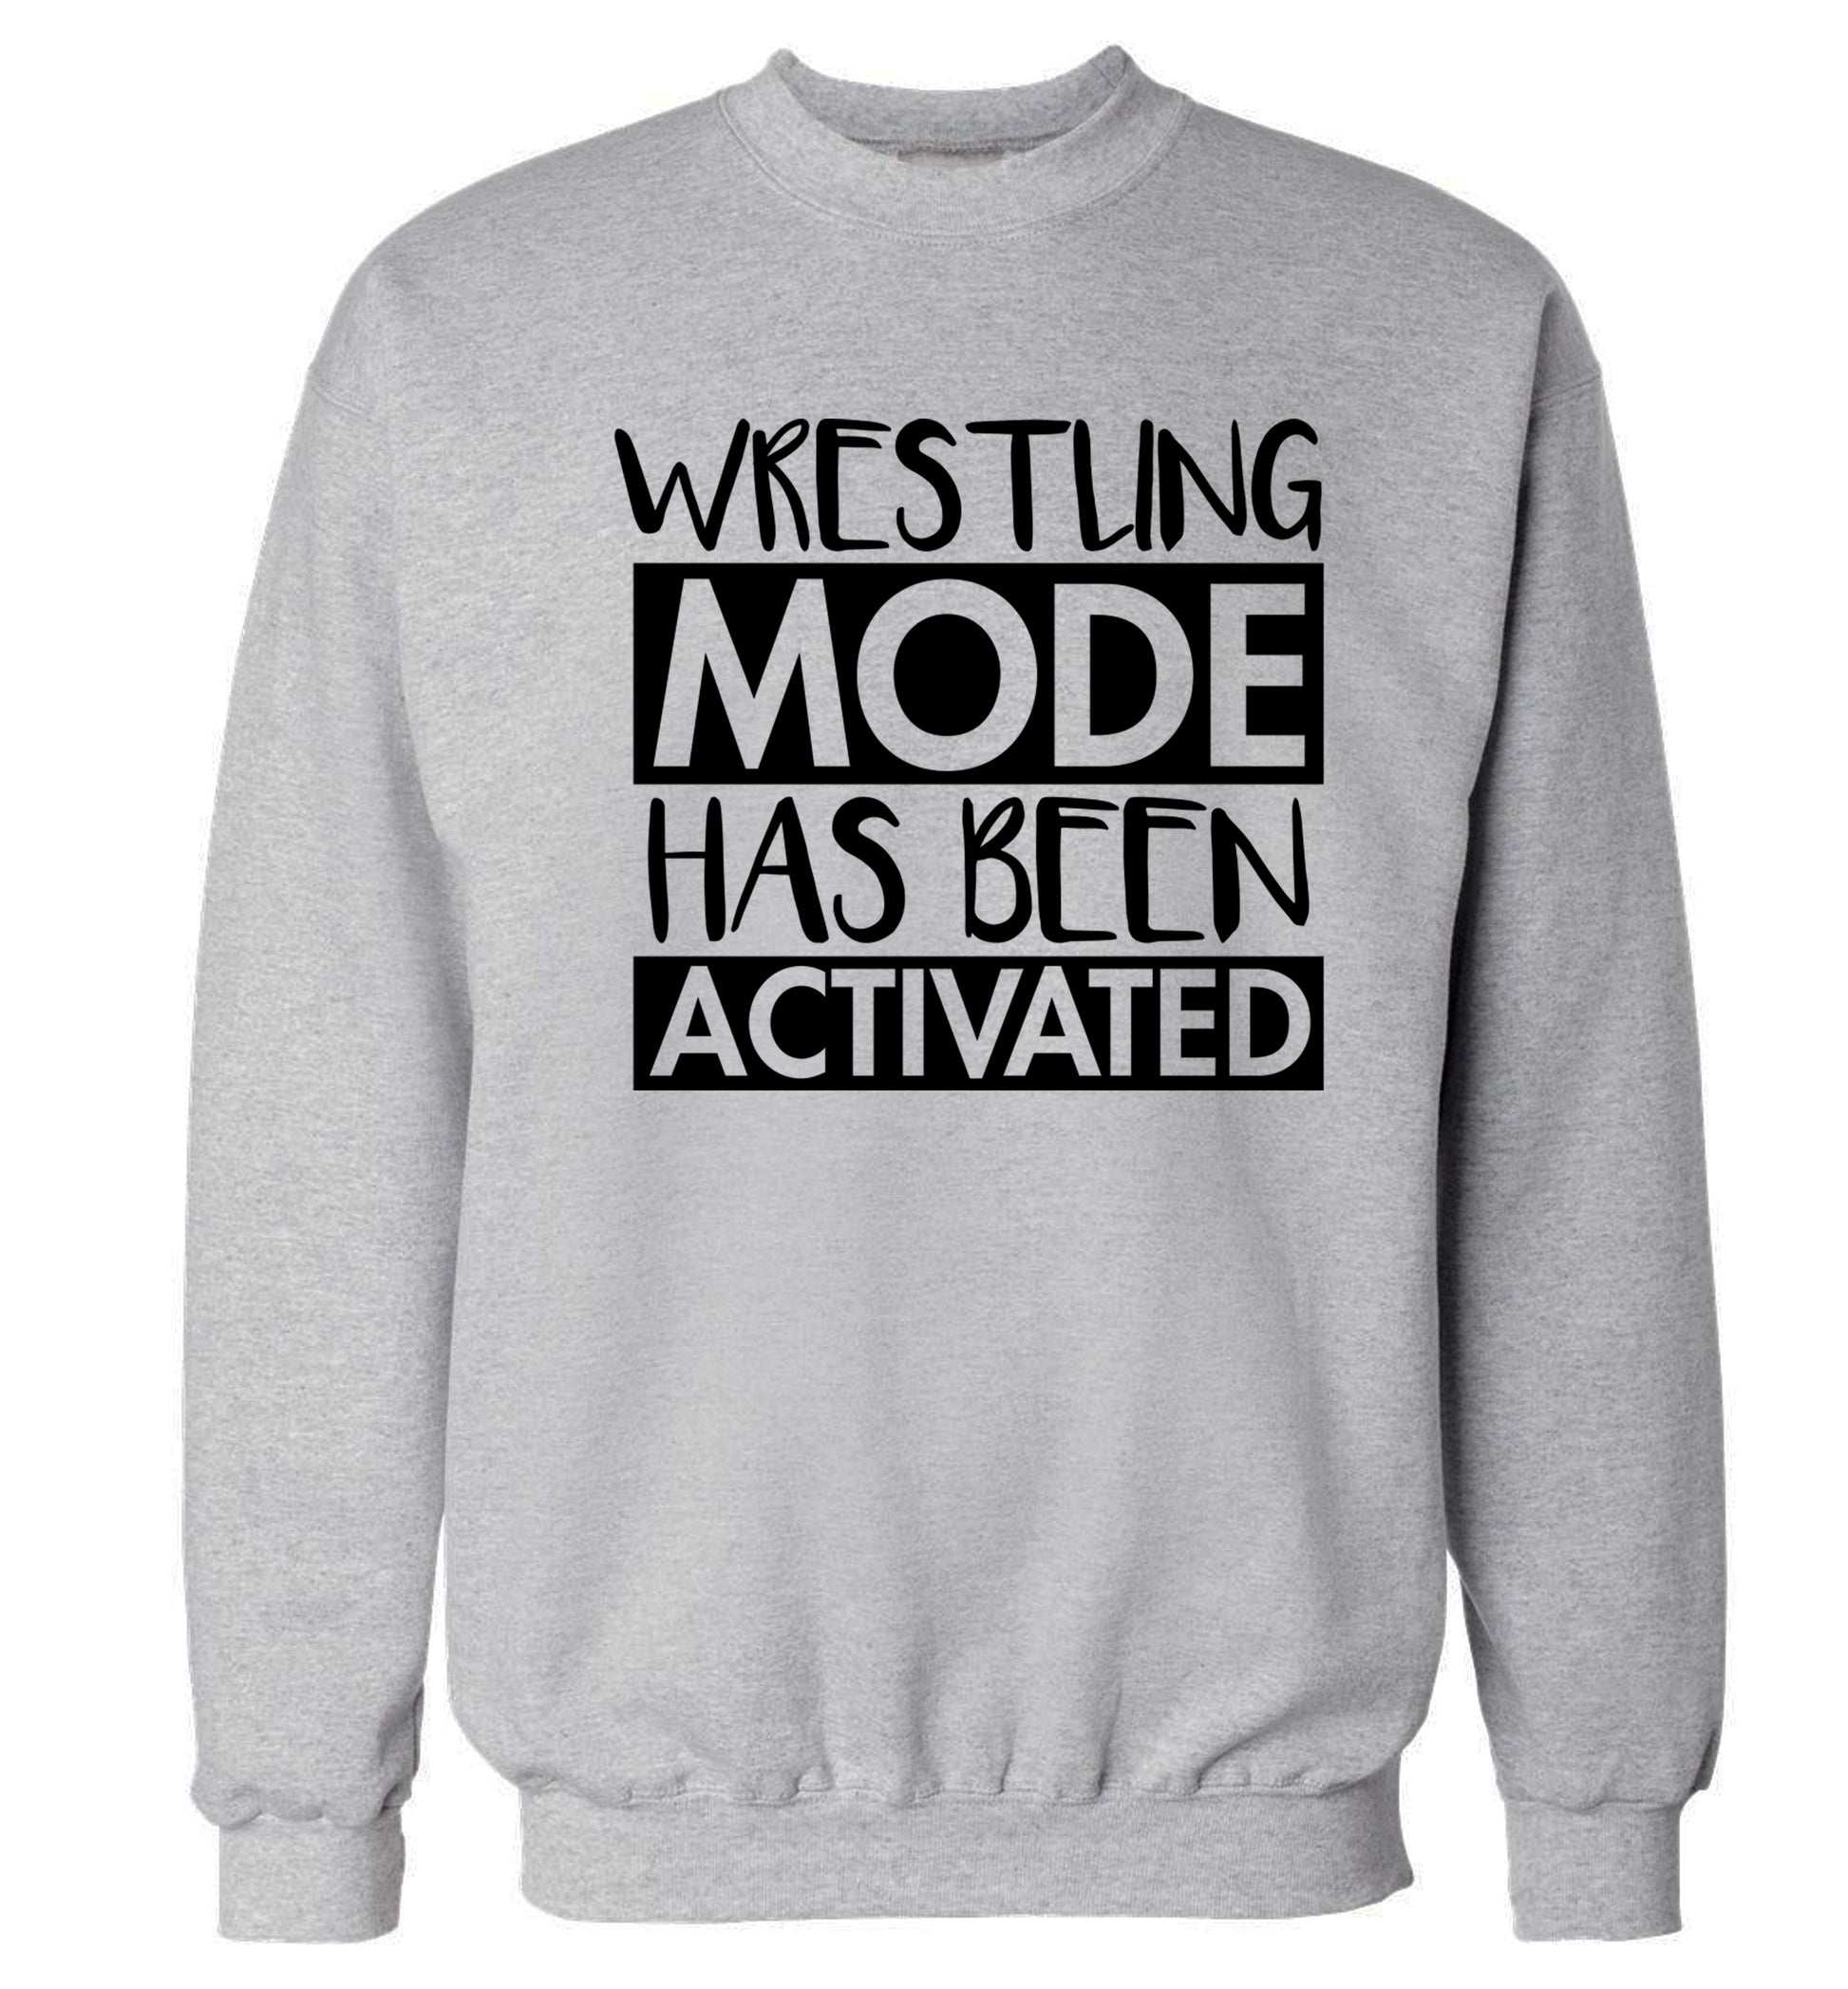 Wresting mode activated Adult's unisex grey Sweater 2XL